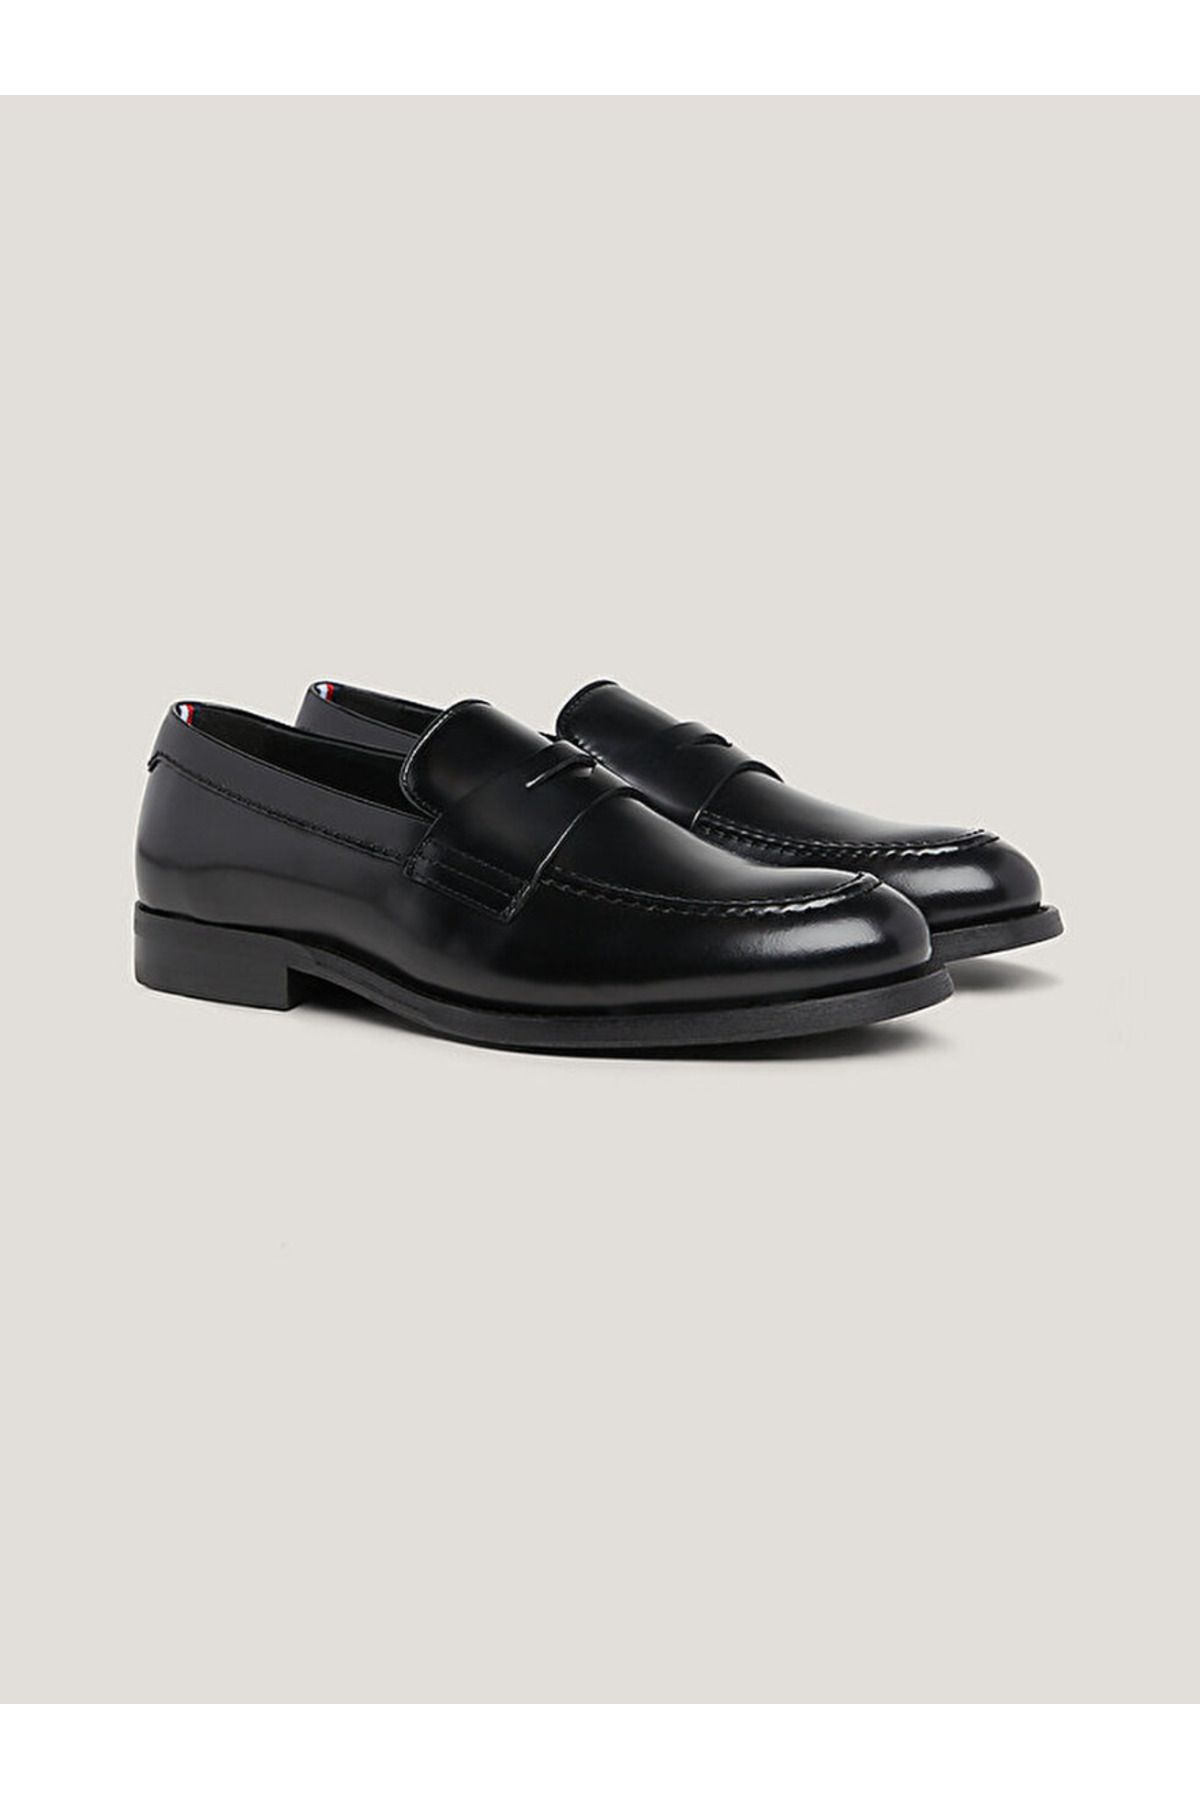 Tommy Hilfiger Stitched Patent Leather Loafer